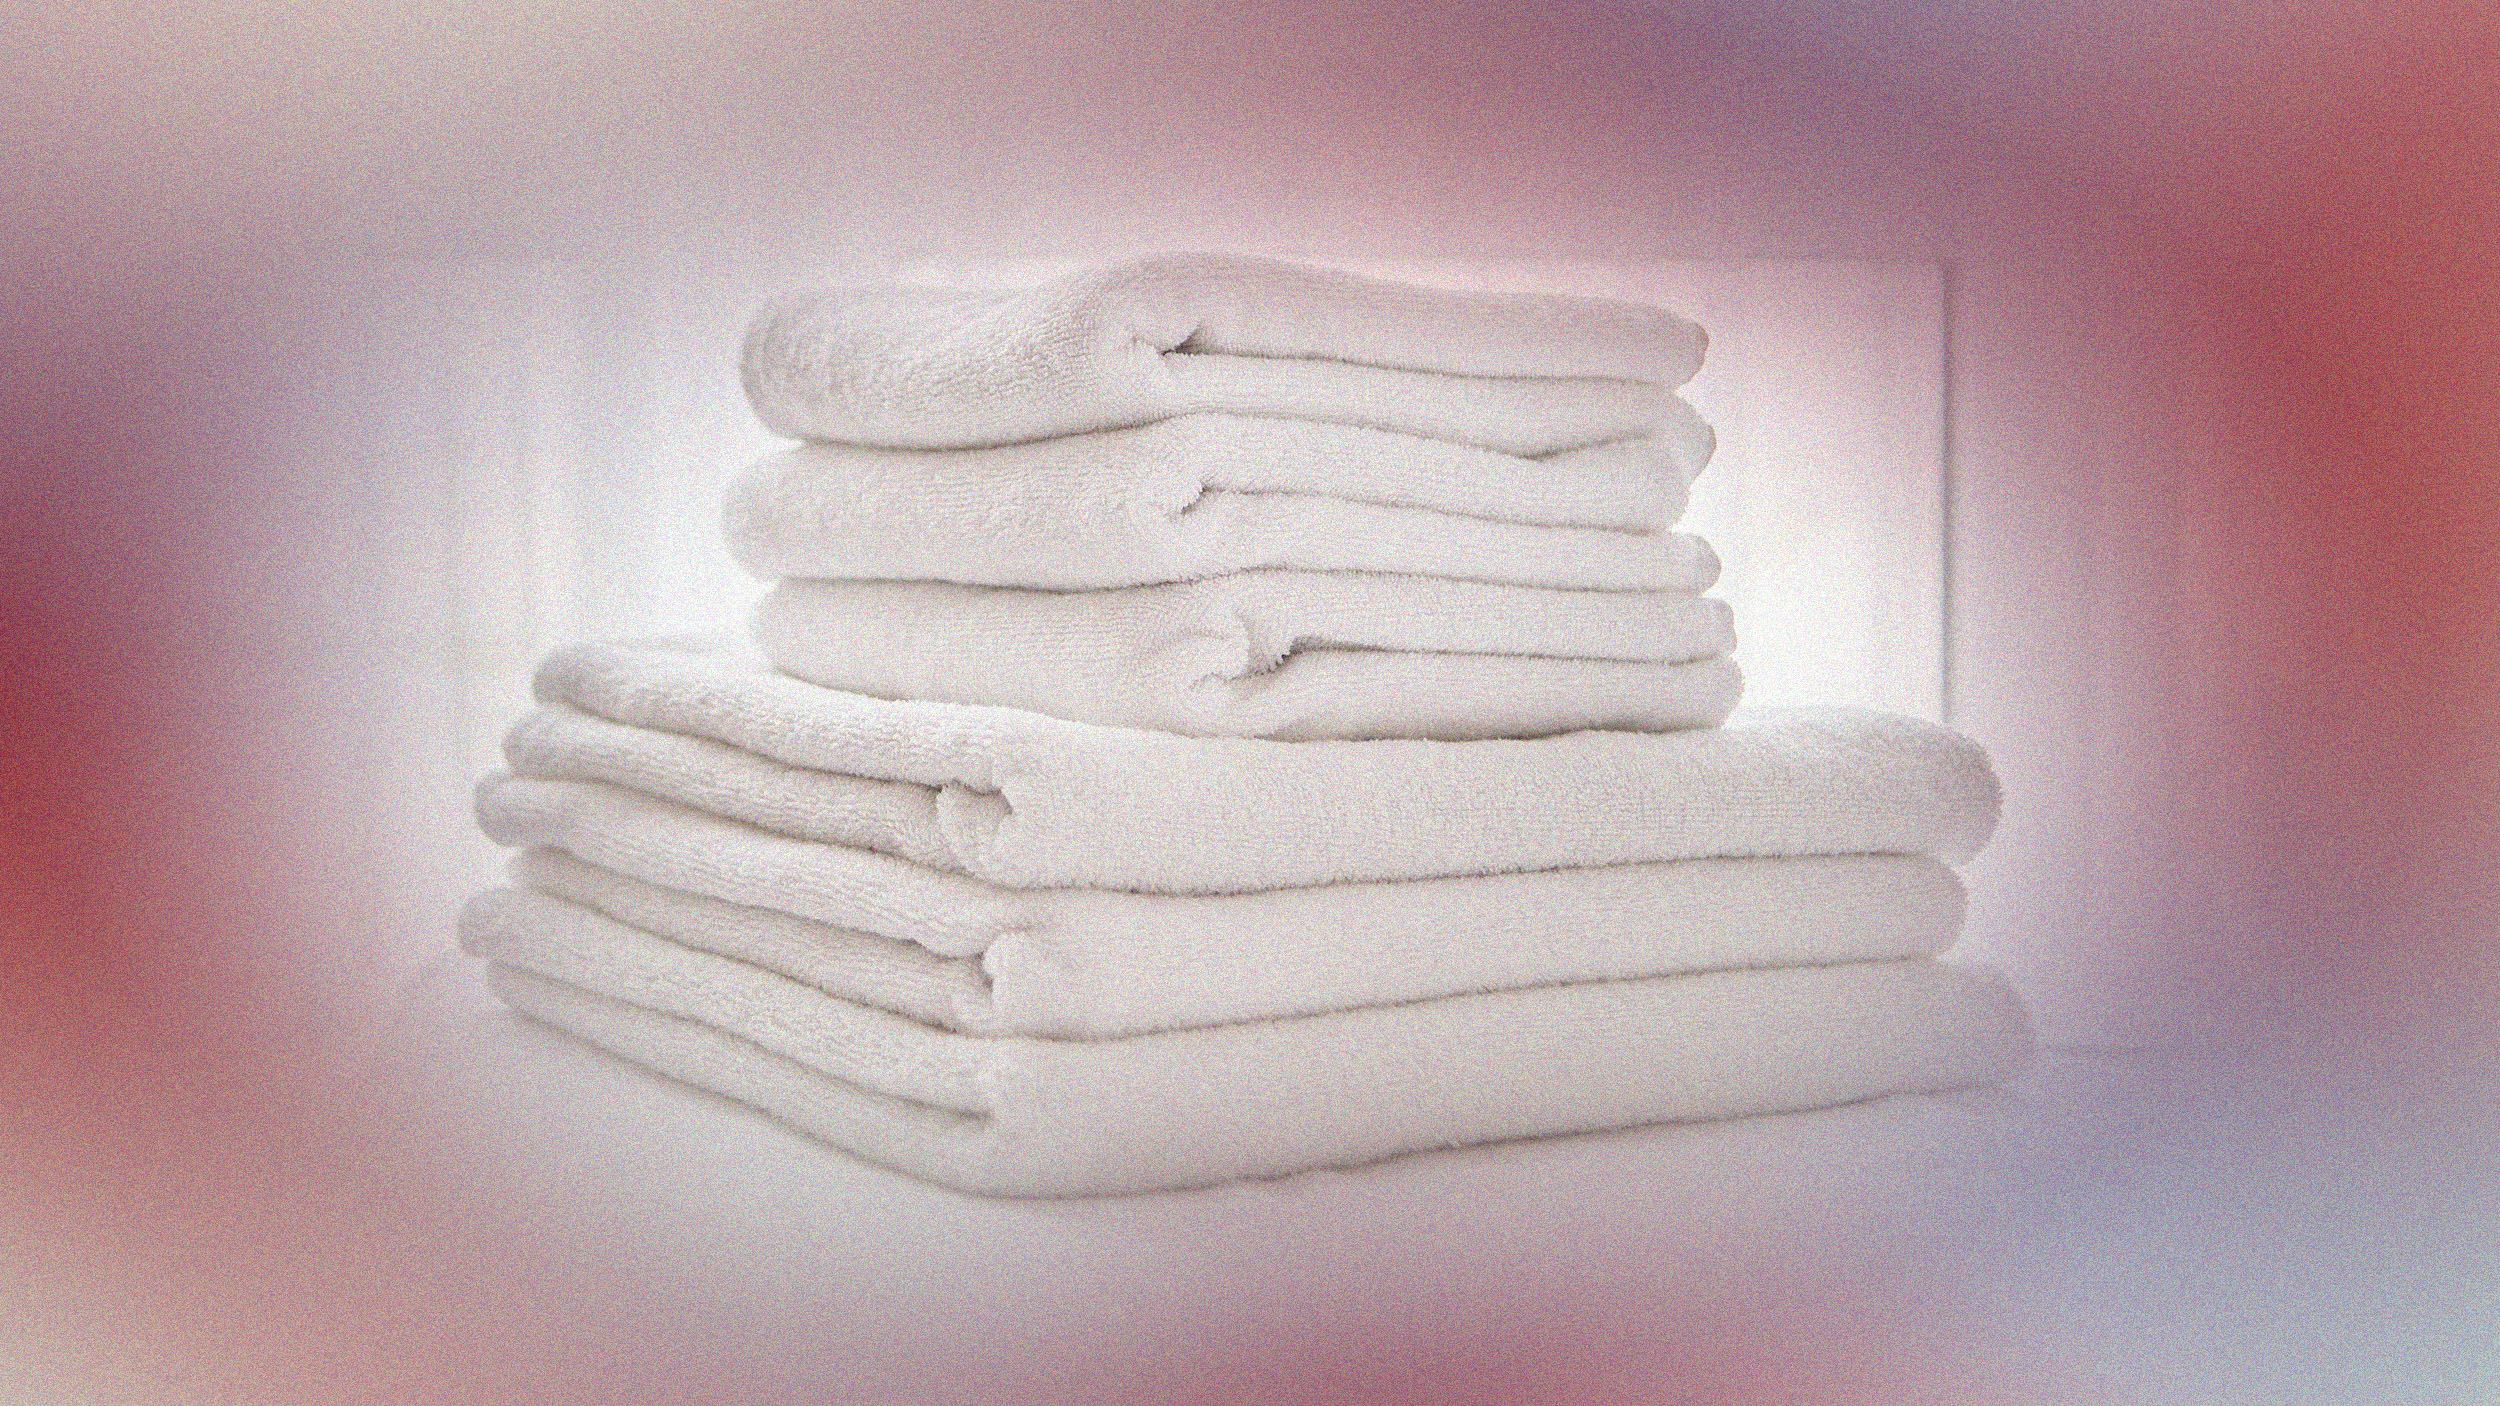 The Best Bath Towels from Fashion Brands